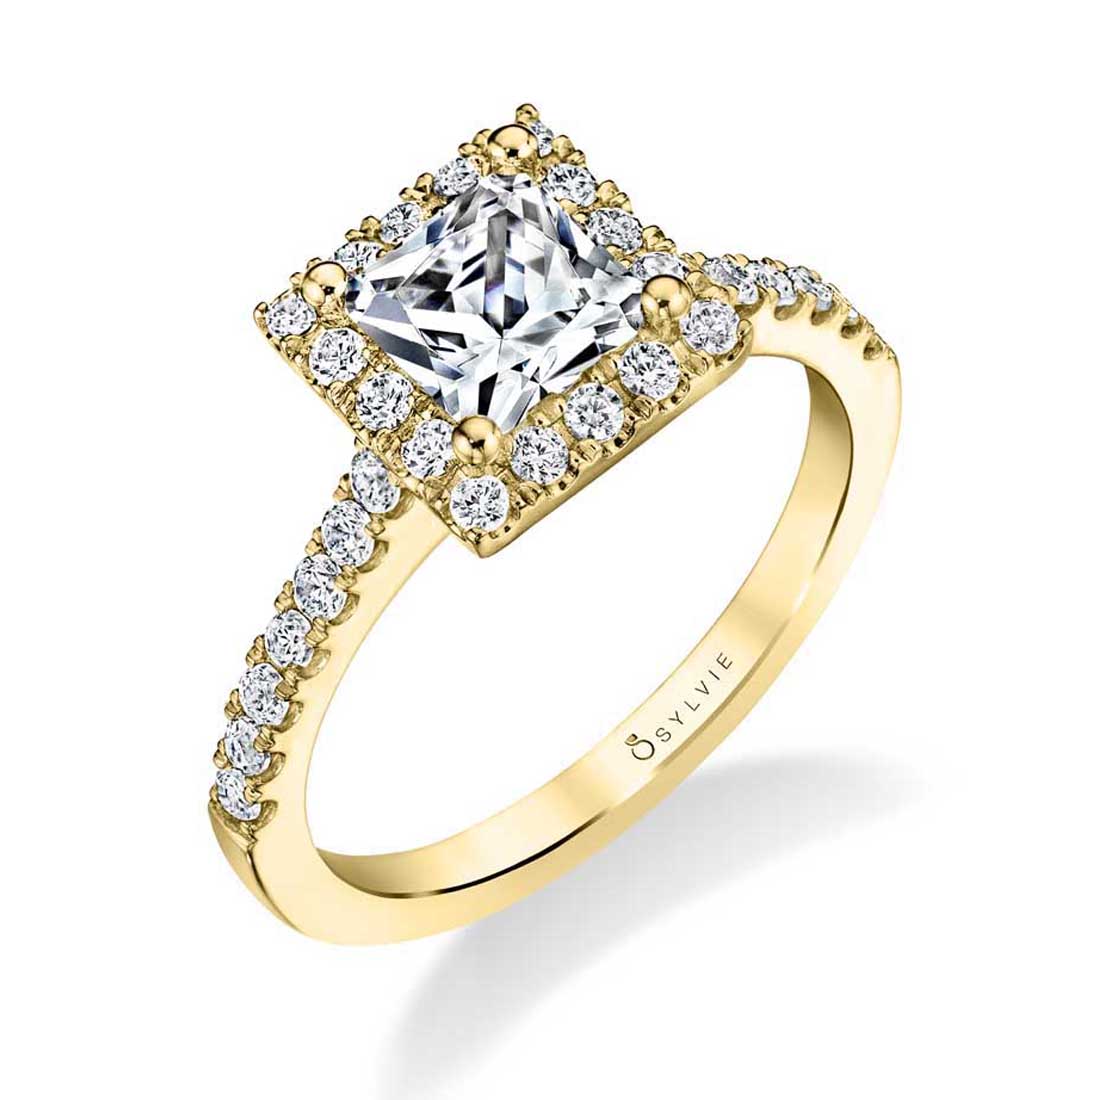 Princess Cut Engagement Ring with Halo